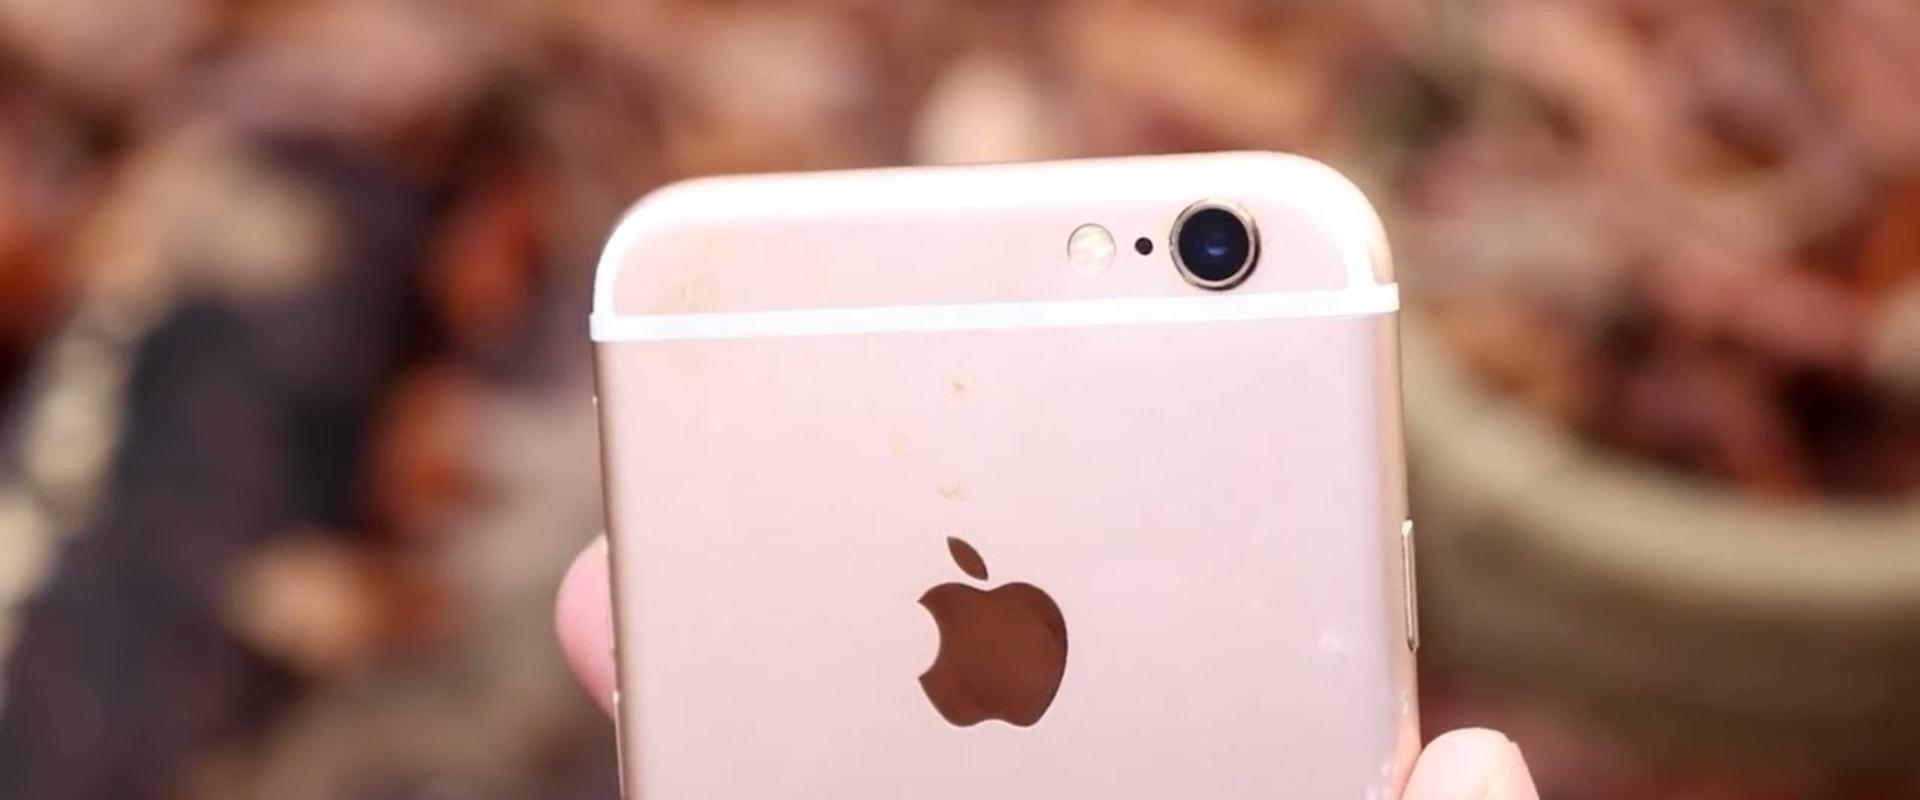 What happens when apple stops supporting iphone 6?